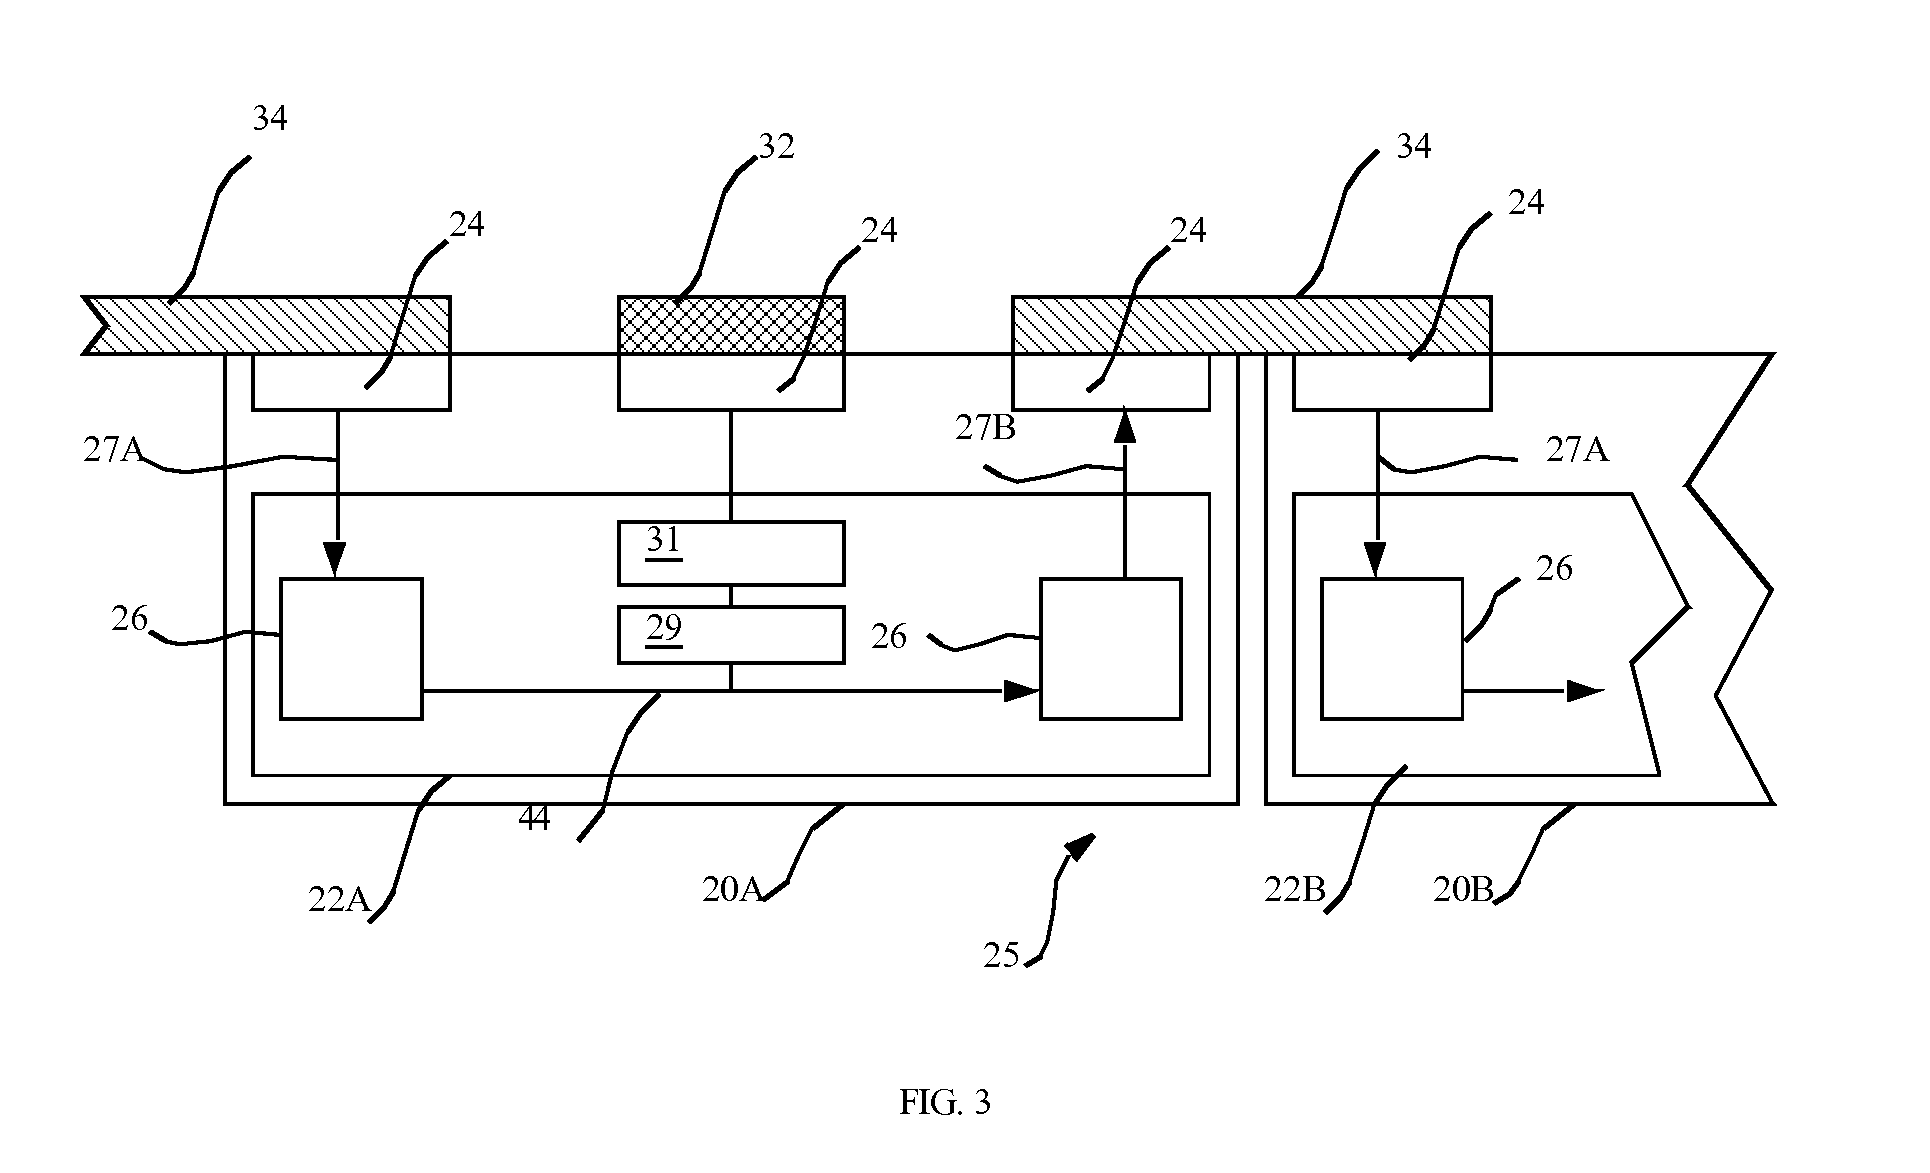 Chiplet display device with serial control